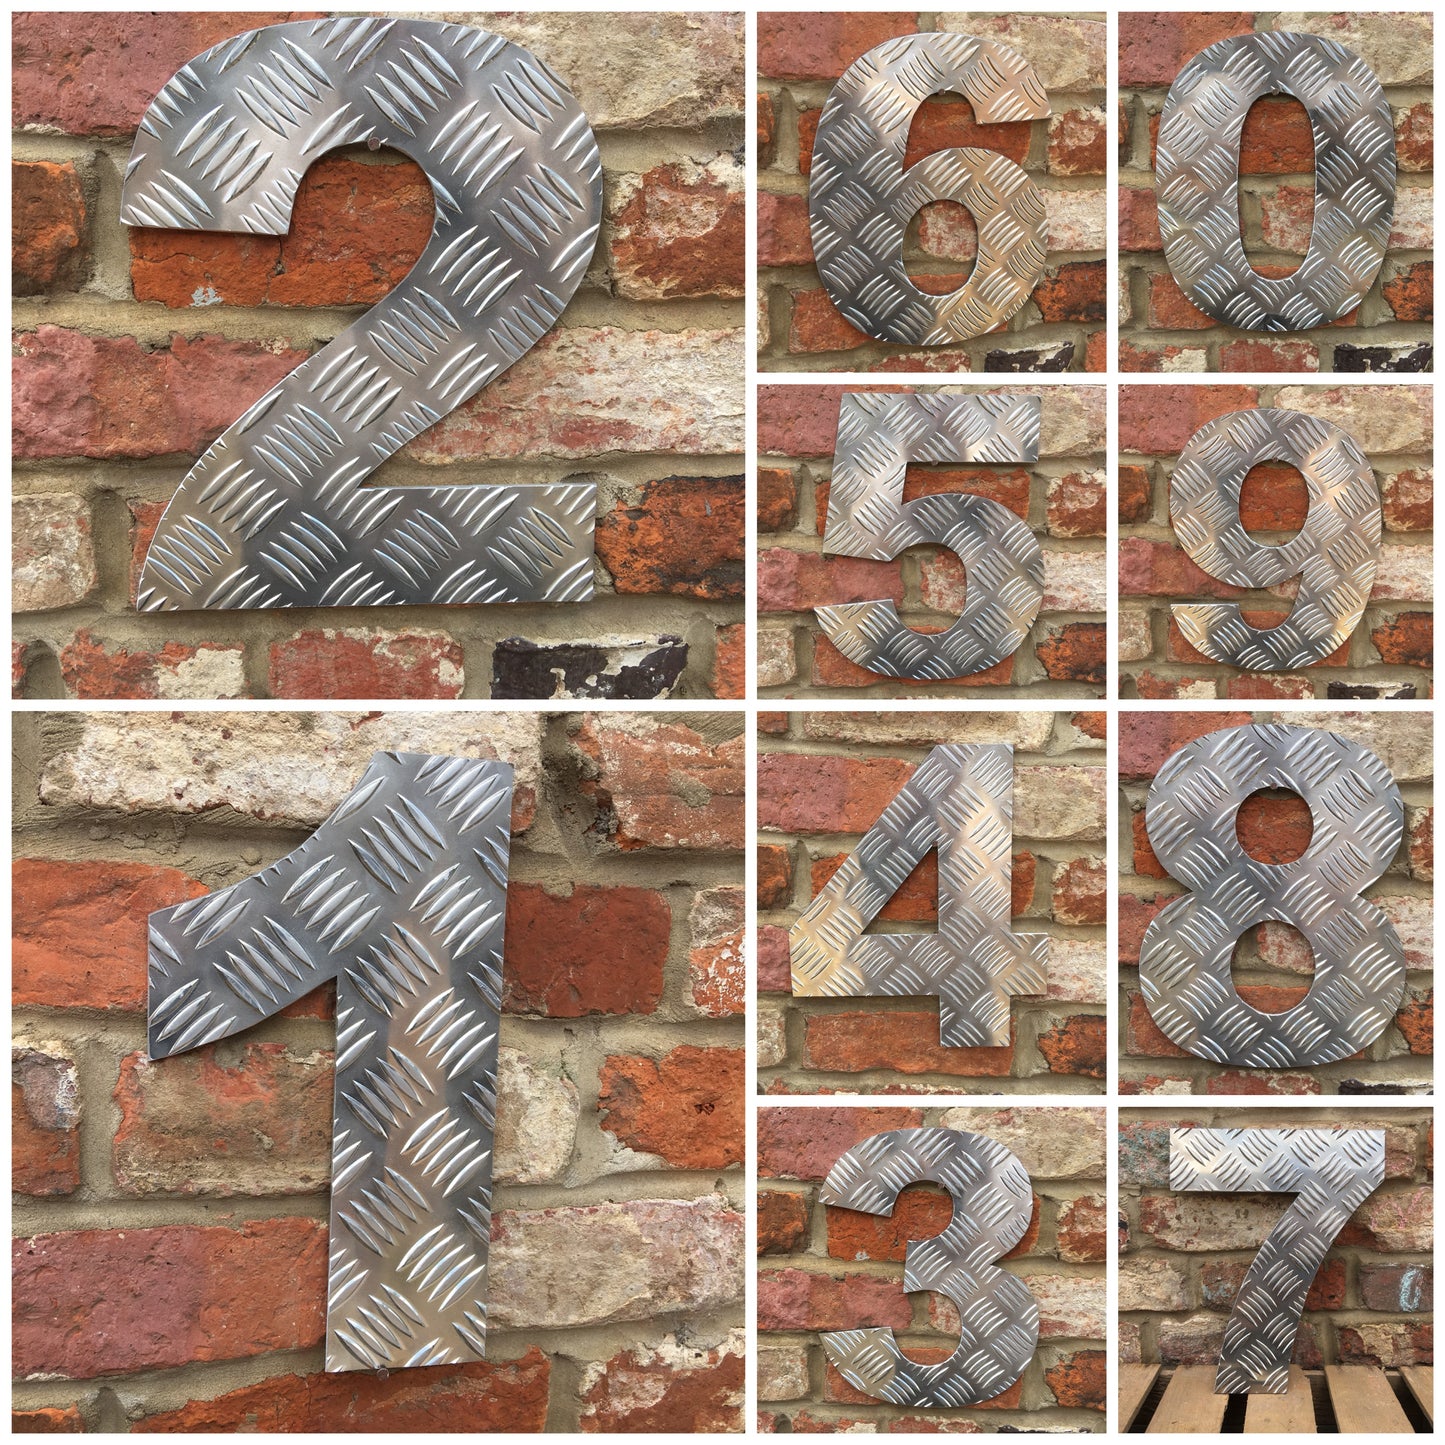 5" or 12" Aluminum Industrial Lettering A-Z 0-9